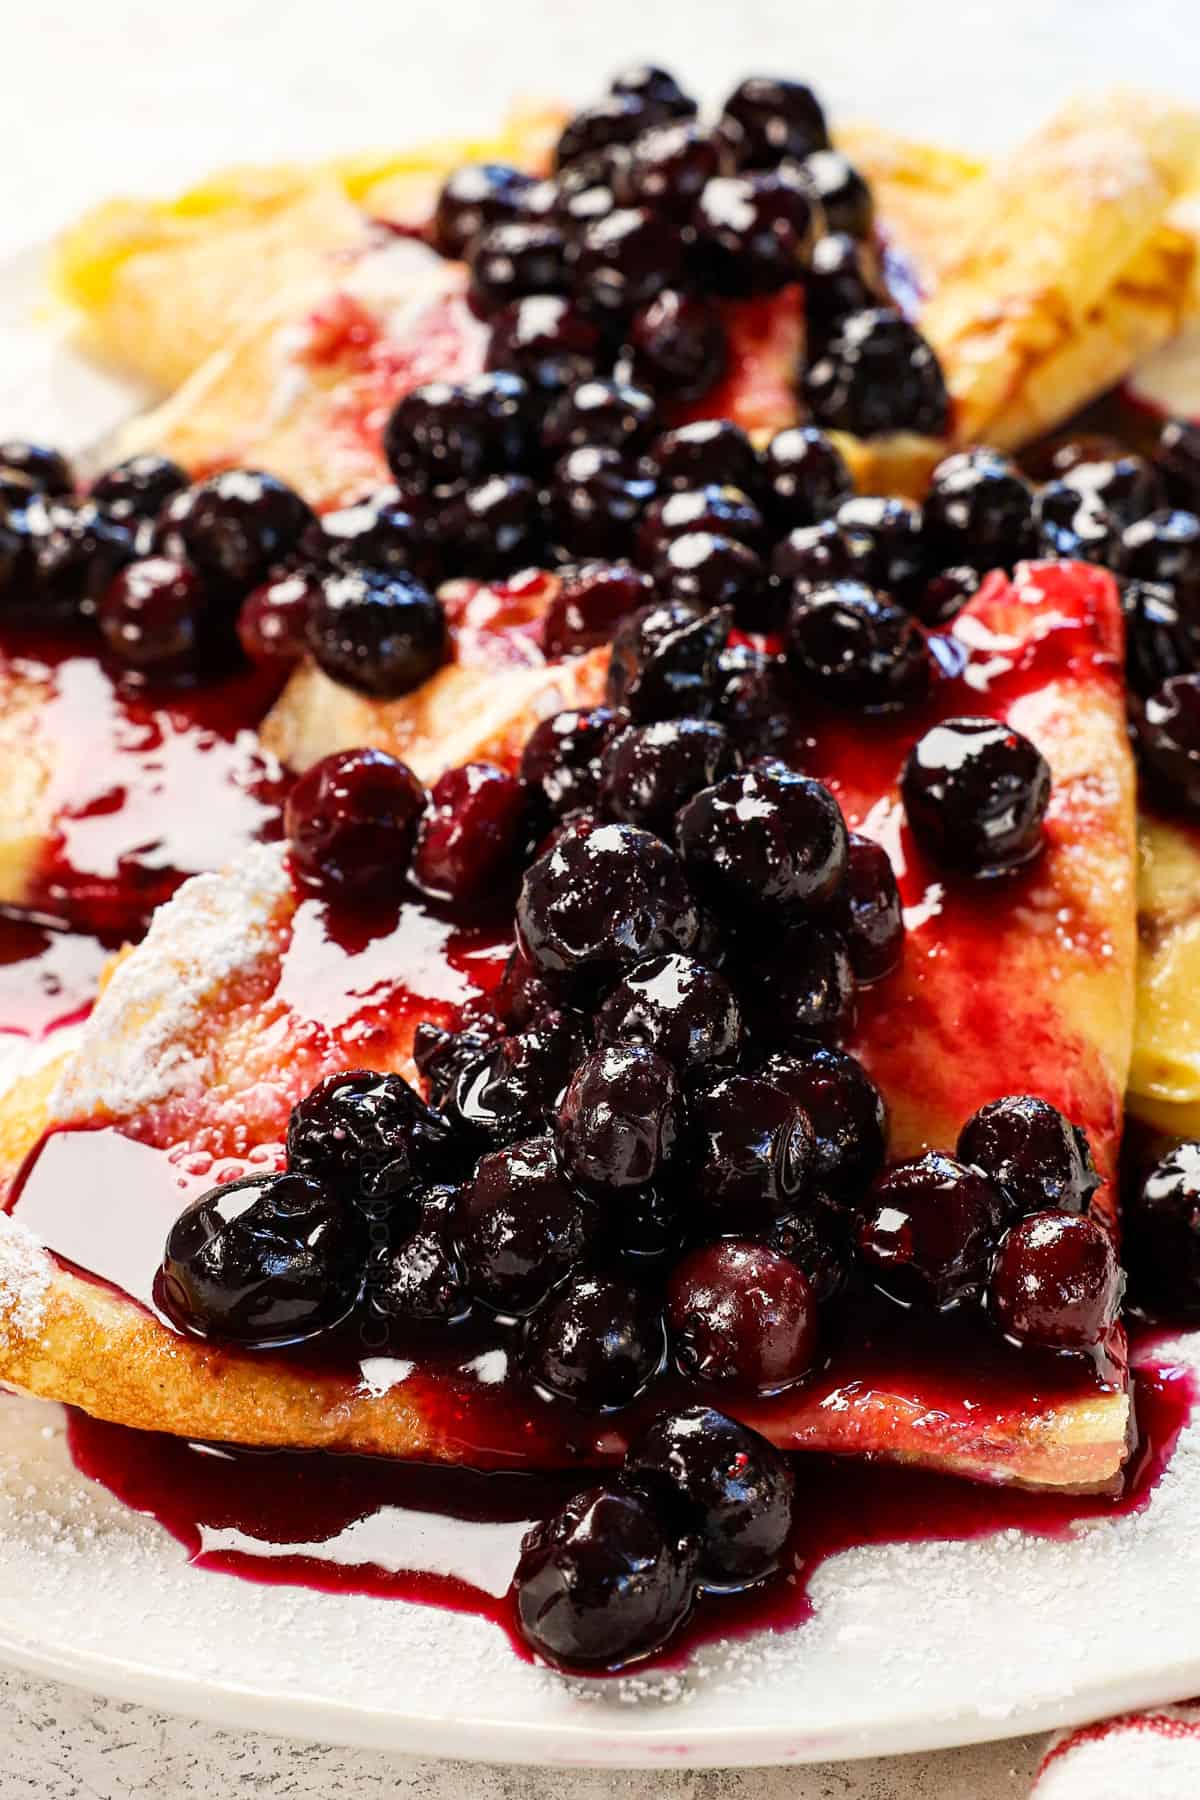 serving crepes with berries, cream and powdered sugar